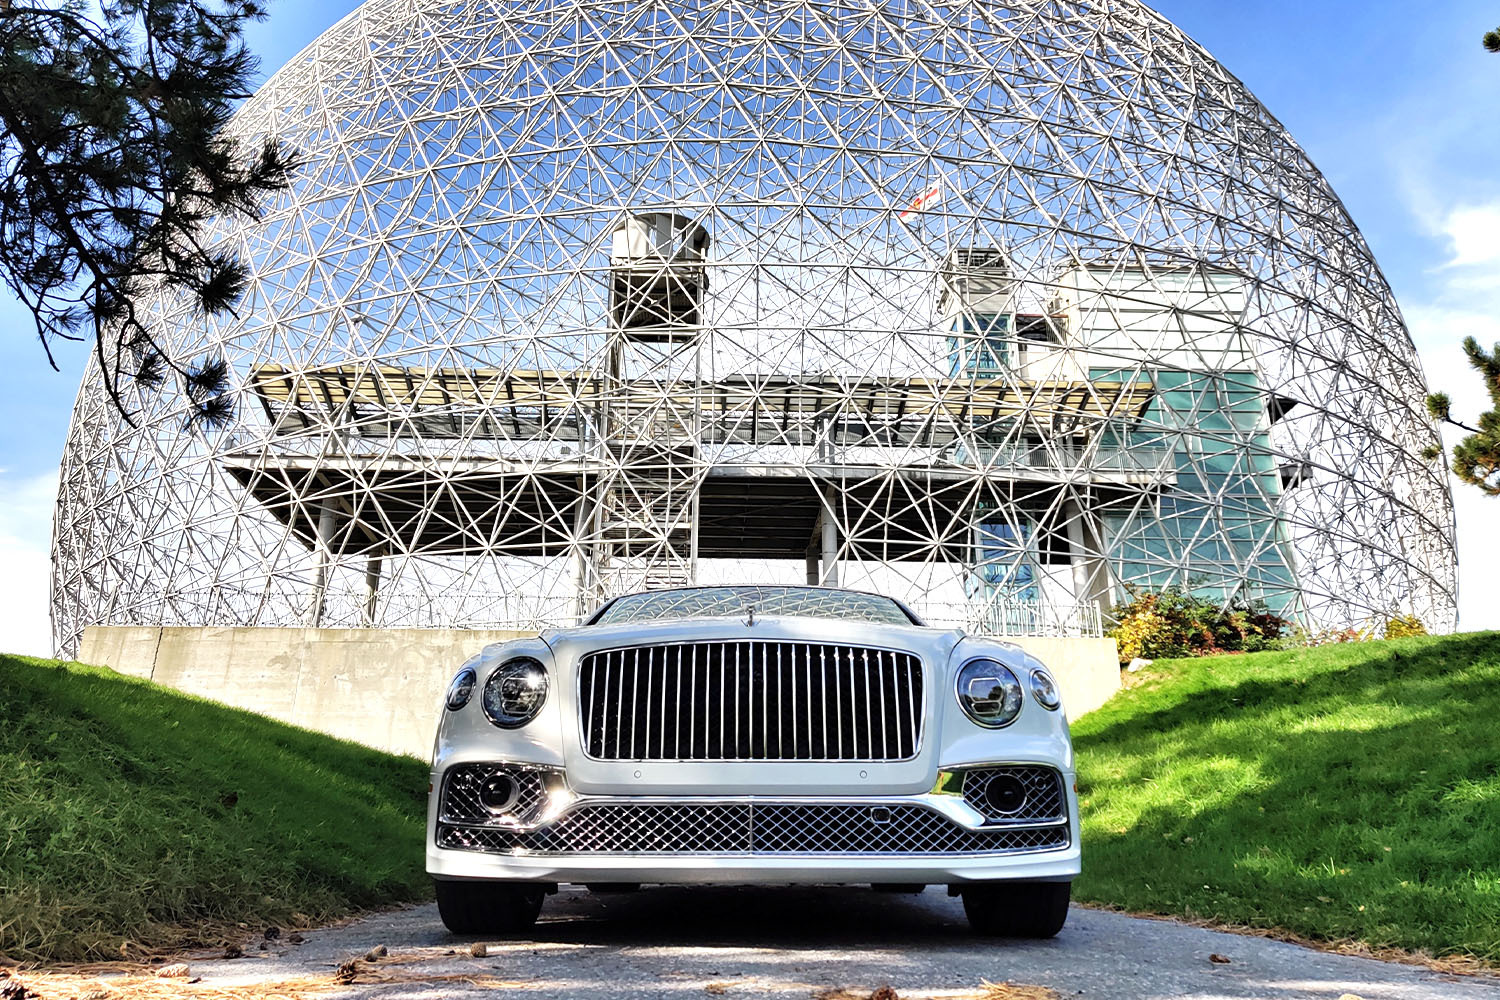 The 2022 Bentley Flying Spur in white in front of the Montreal Biosphere with a dome designed by Buckminster Fuller